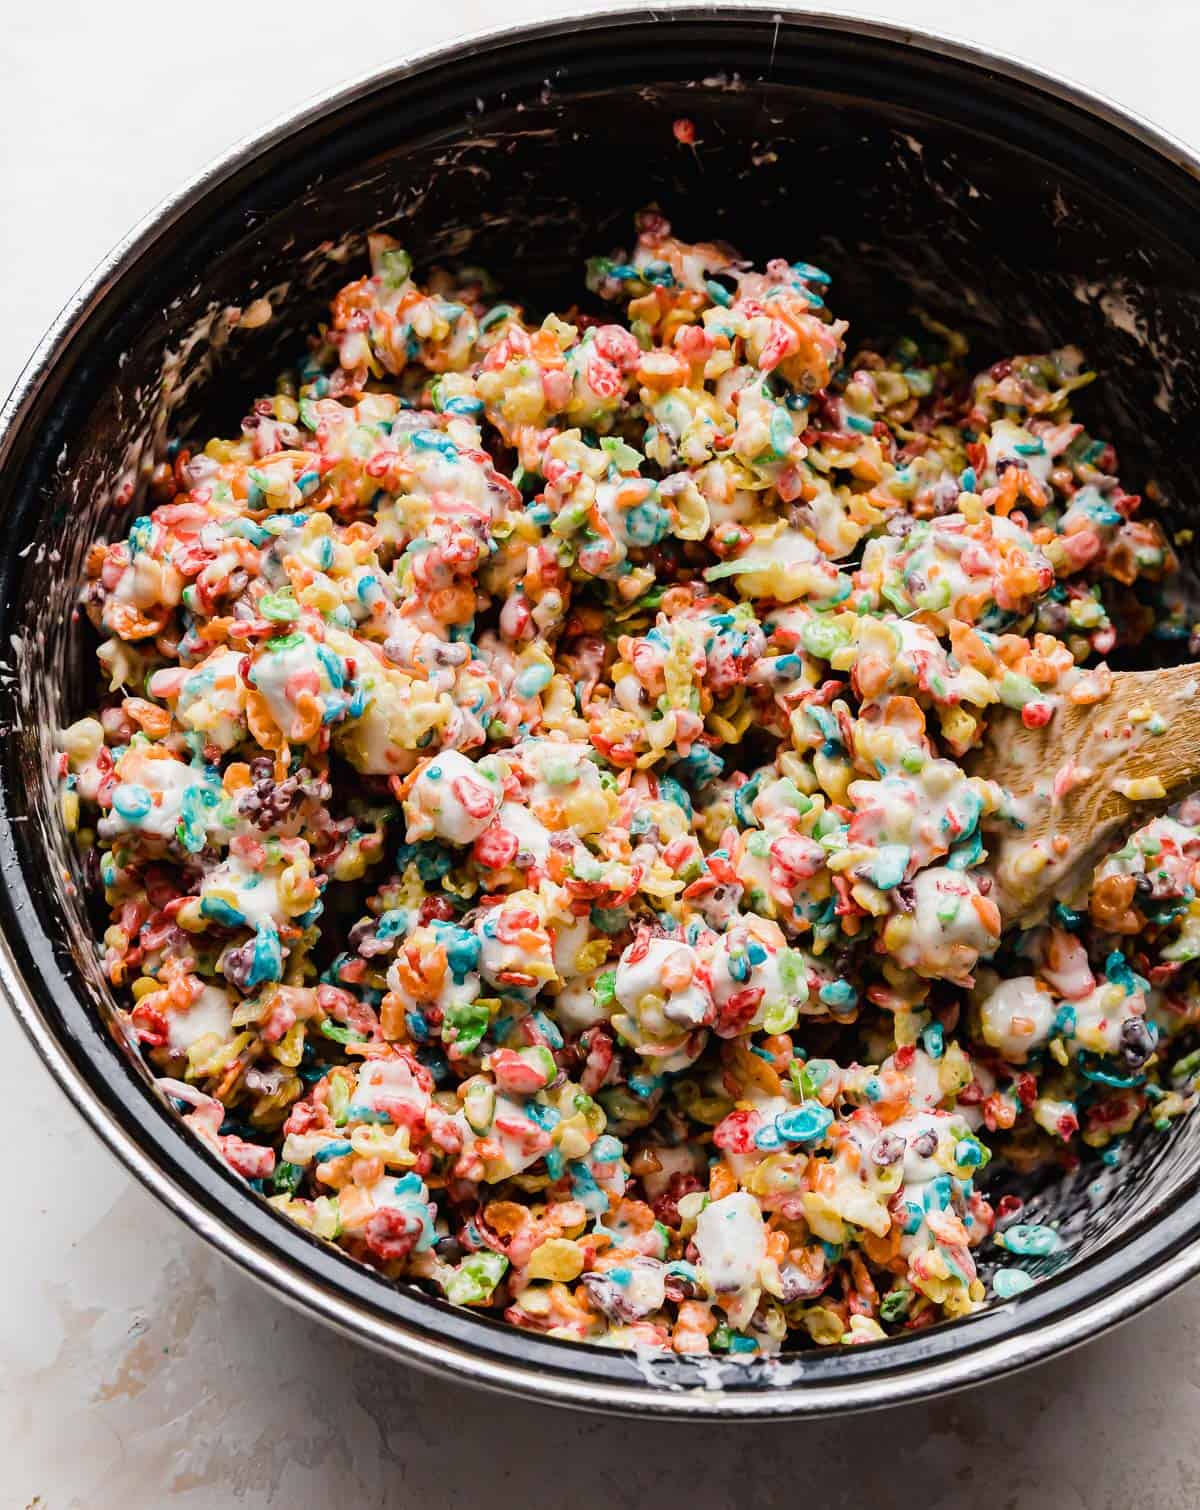 A close up photo of Fruity Pebbles Rice Krispies in a black pot.